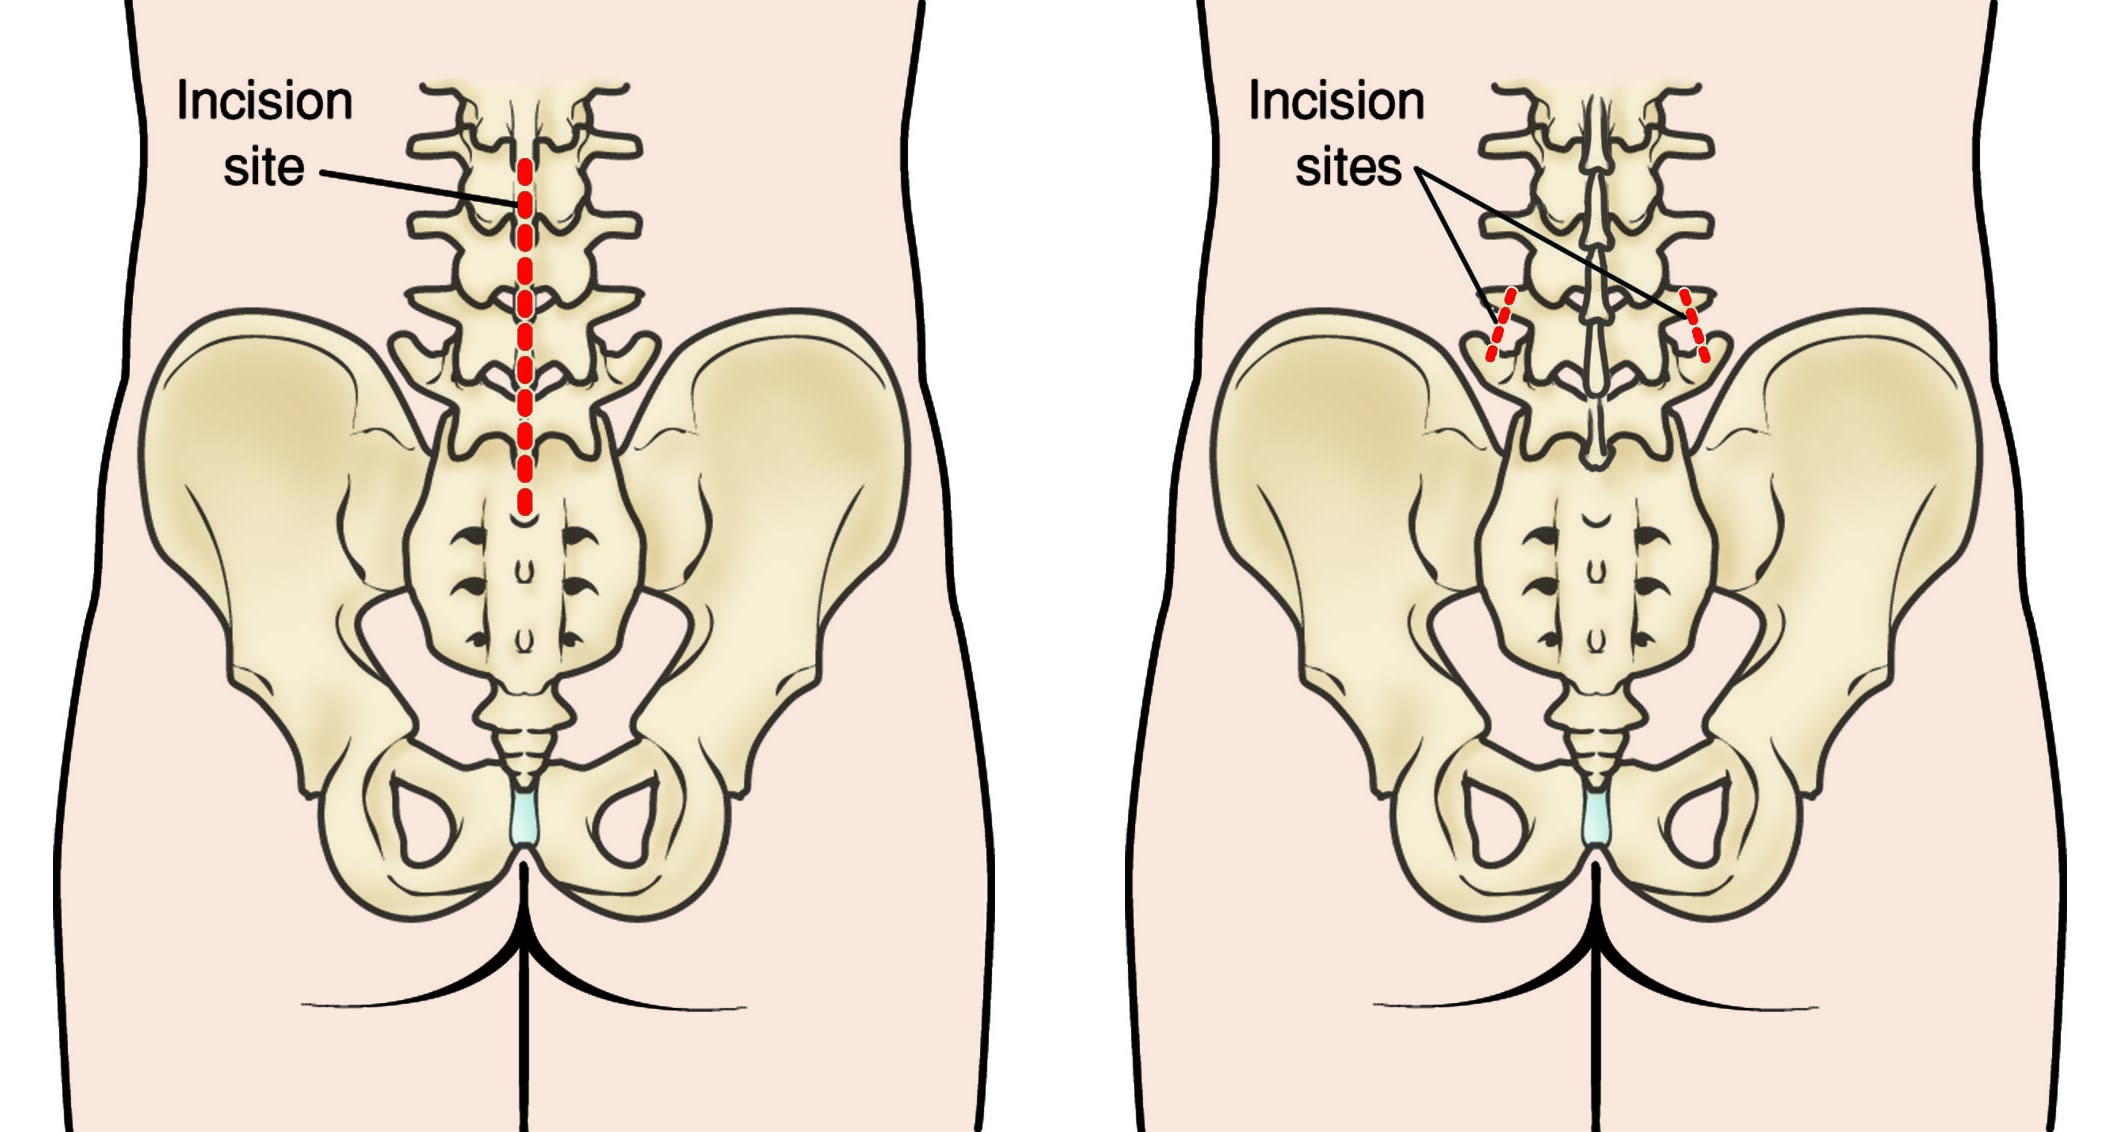 Incision sites for open surgery and minimally invasive surgery